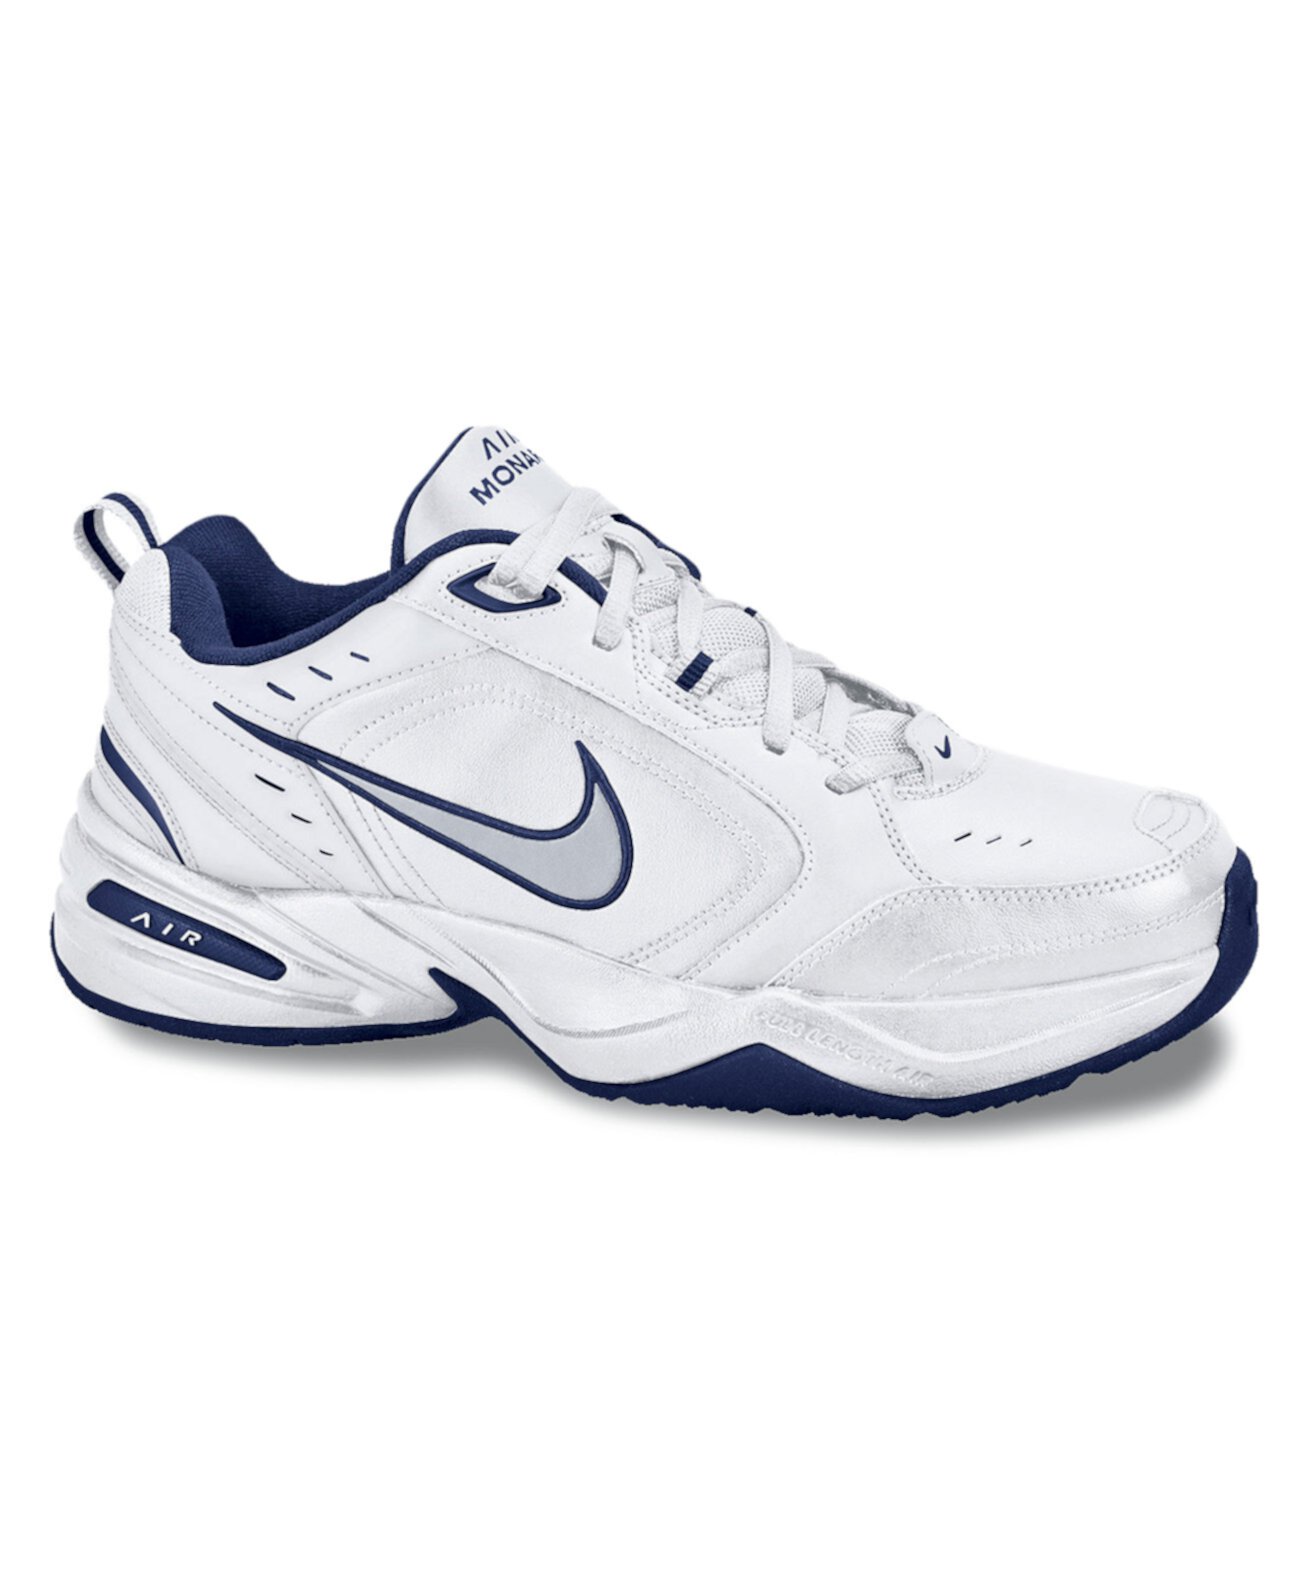 Men's Air Monarch IV Training Sneakers from Finish Line Nike